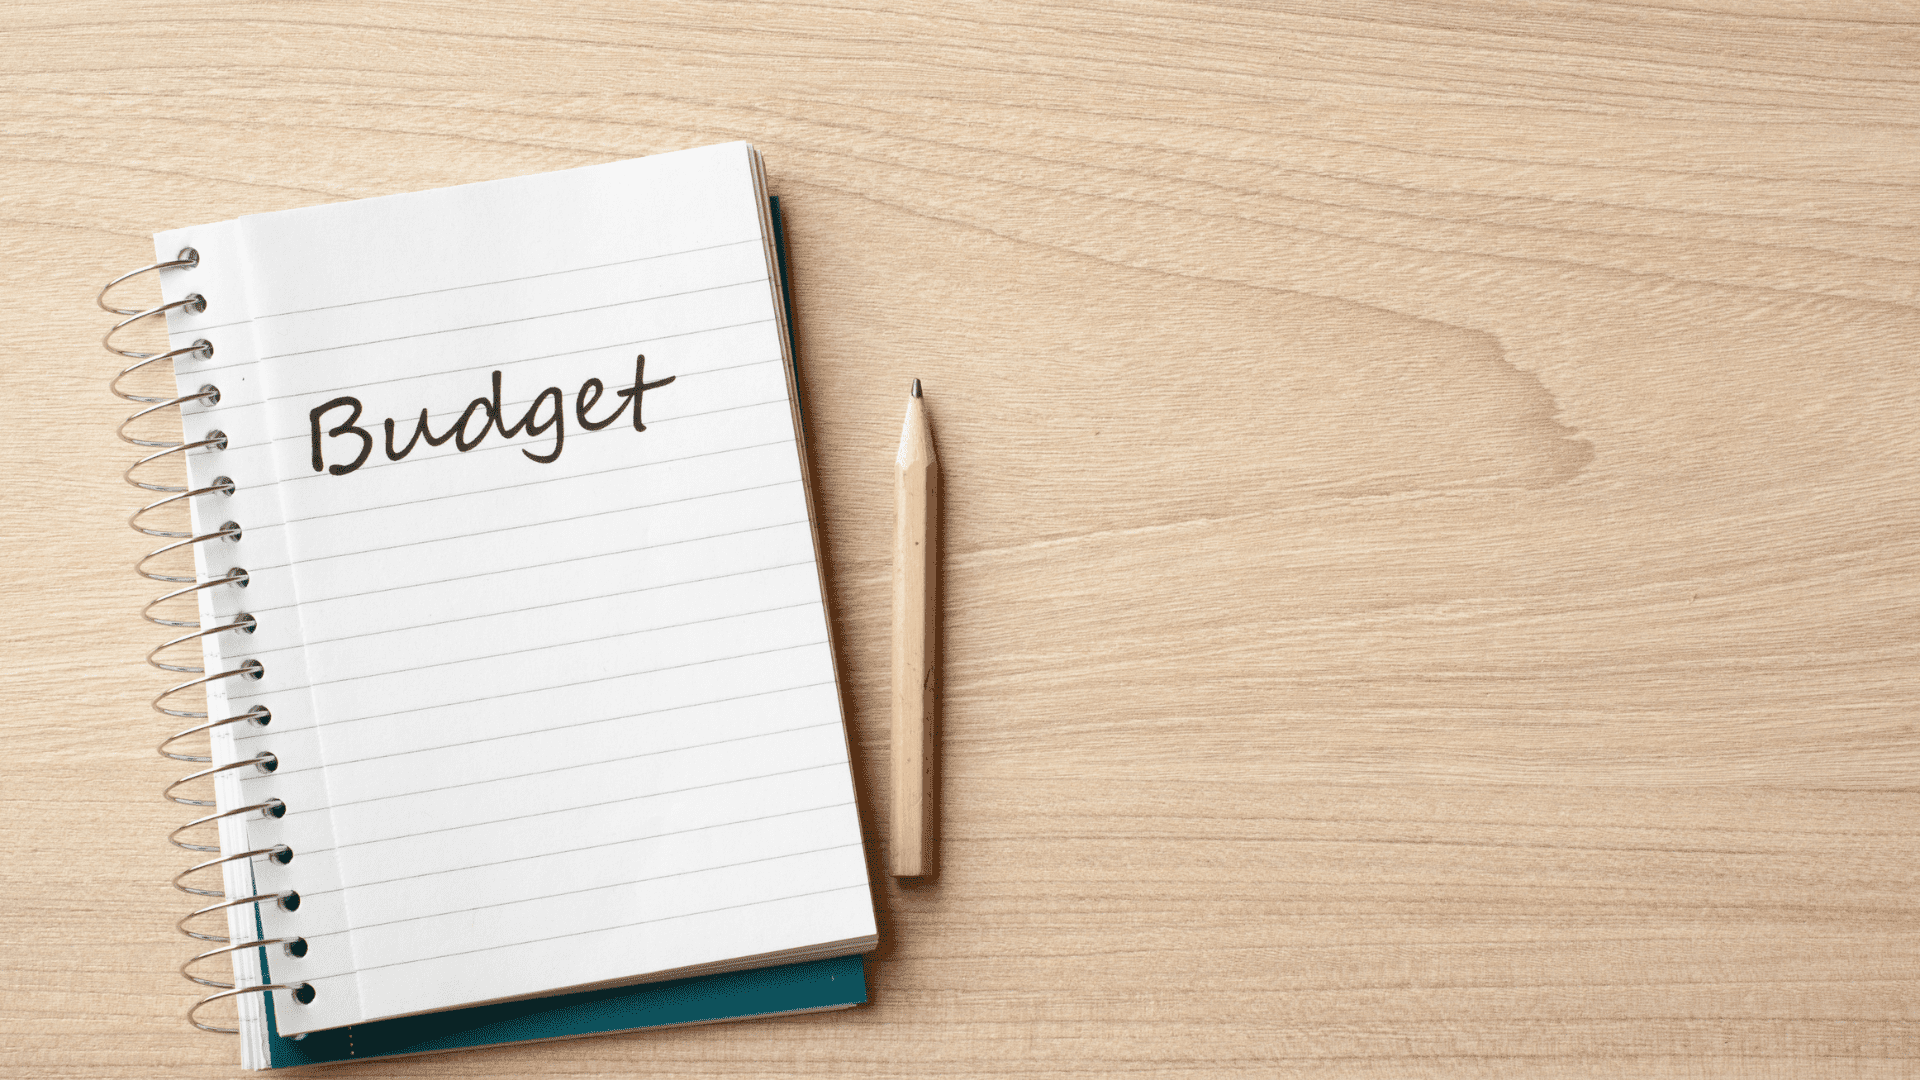 Church Budgeting 101: Tips for Developing and Following a Budget